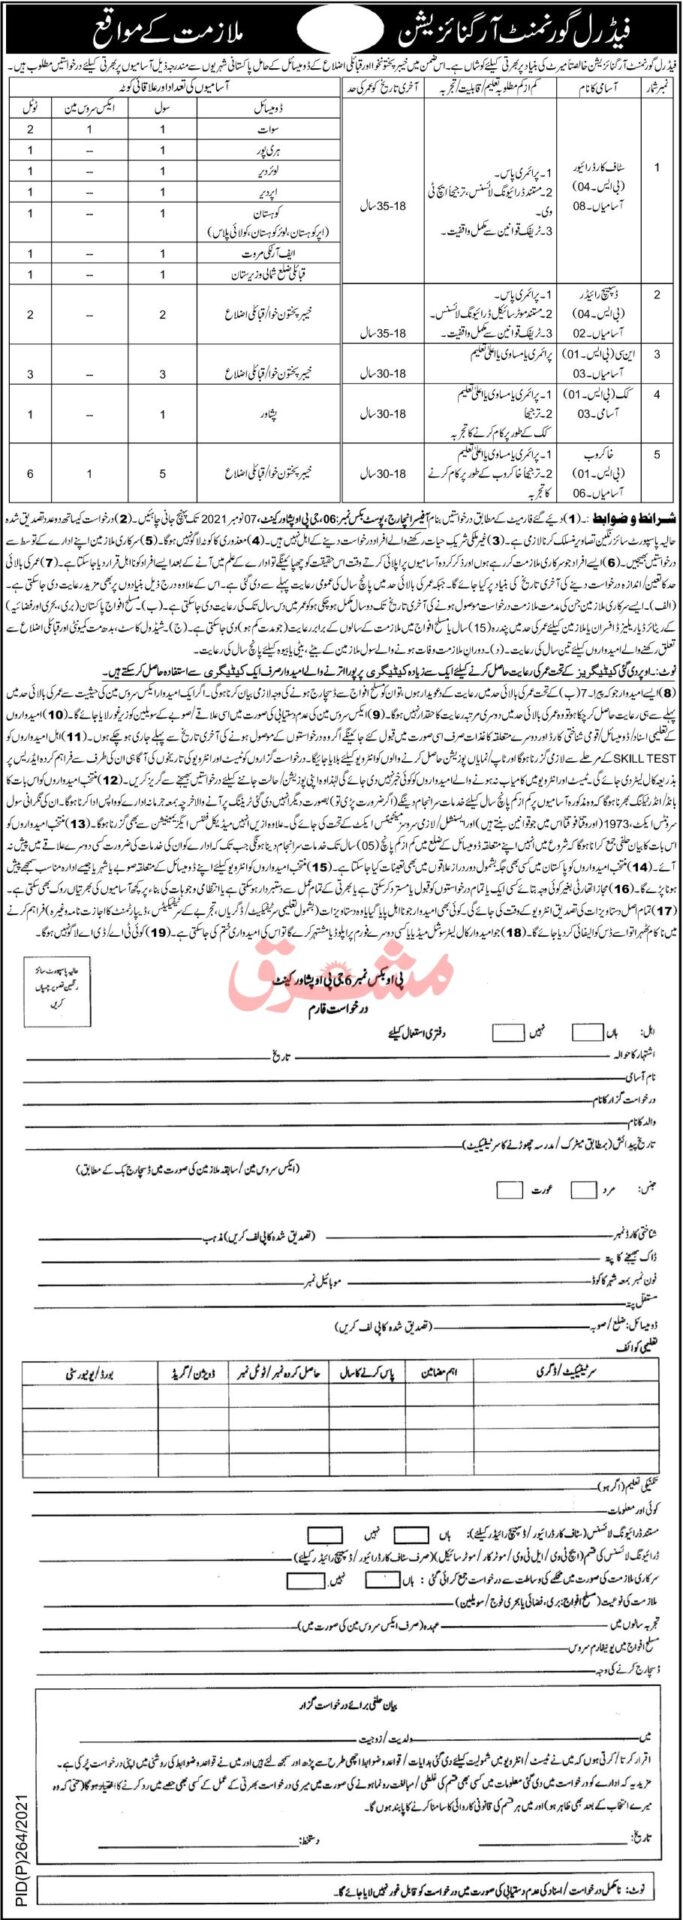 Govt Jobs in KPK 2021 Today At Federal Government Organization